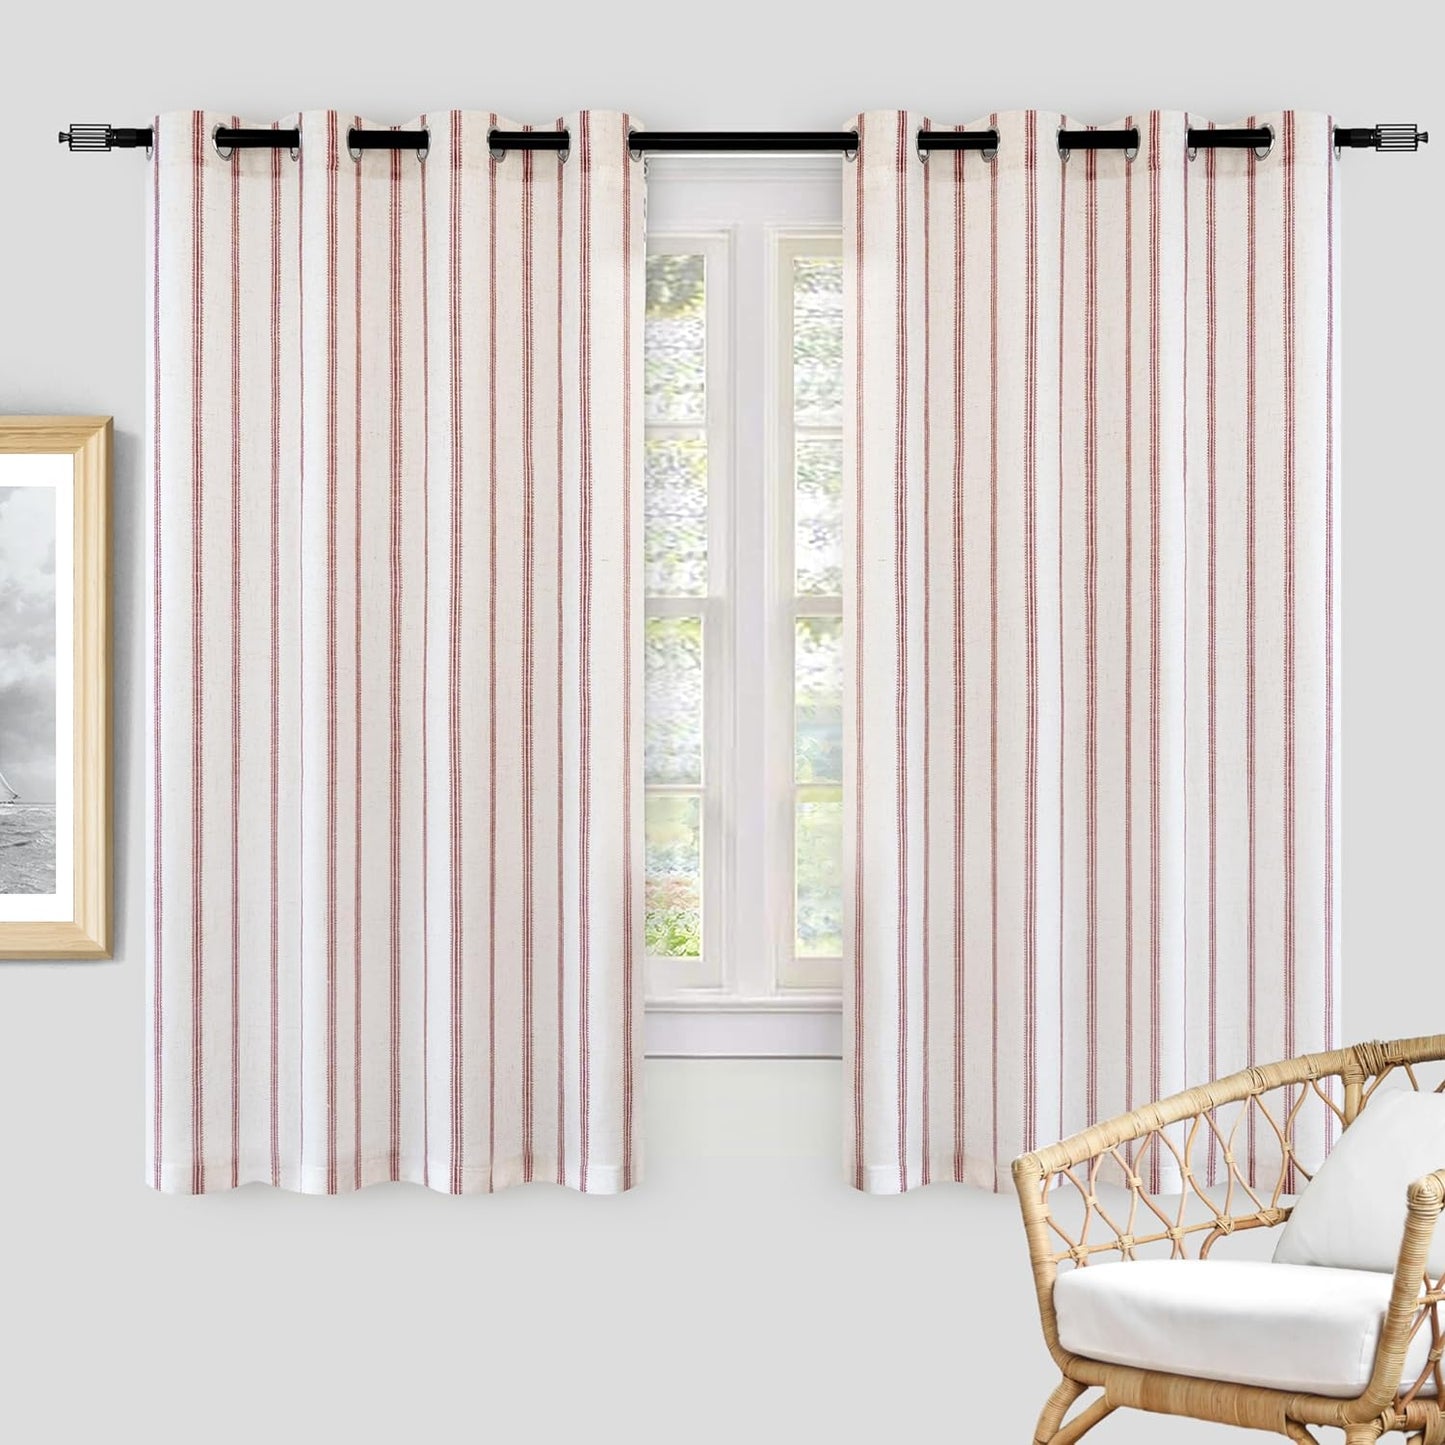 Driftaway Farmhouse Linen Blend Blackout Curtains 84 Inches Long for Bedroom Vertical Striped Printed Linen Curtains Thermal Insulated Grommet Lined Treatments for Living Room 2 Panels W52 X L84 Grey  DriftAway Red 52"X54" 